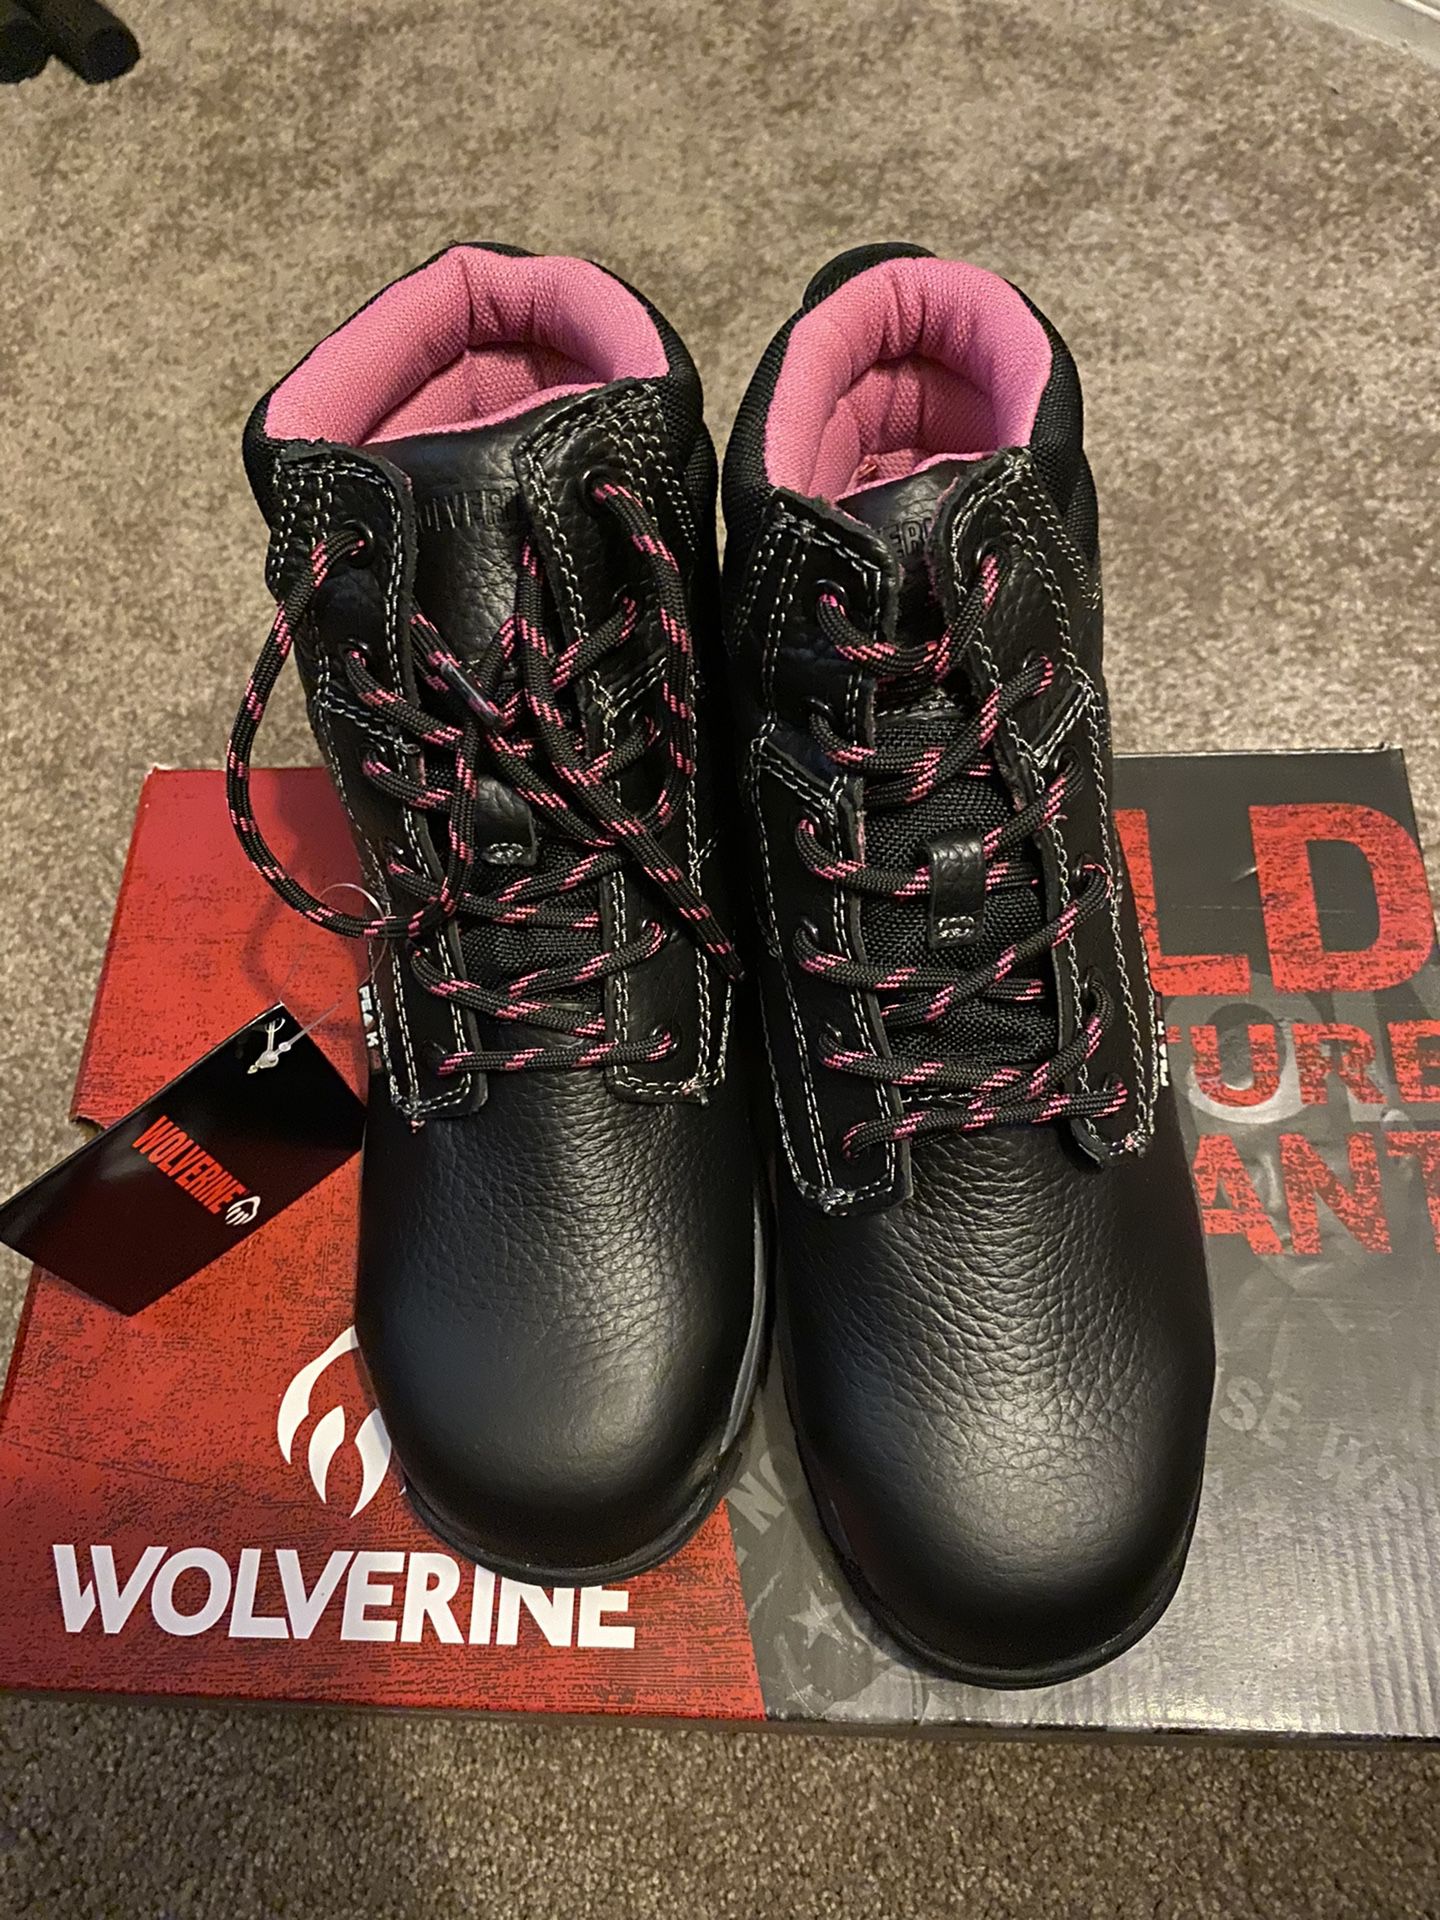 Wolverine Piper 6” Work Boots Size 7.5 W For Women